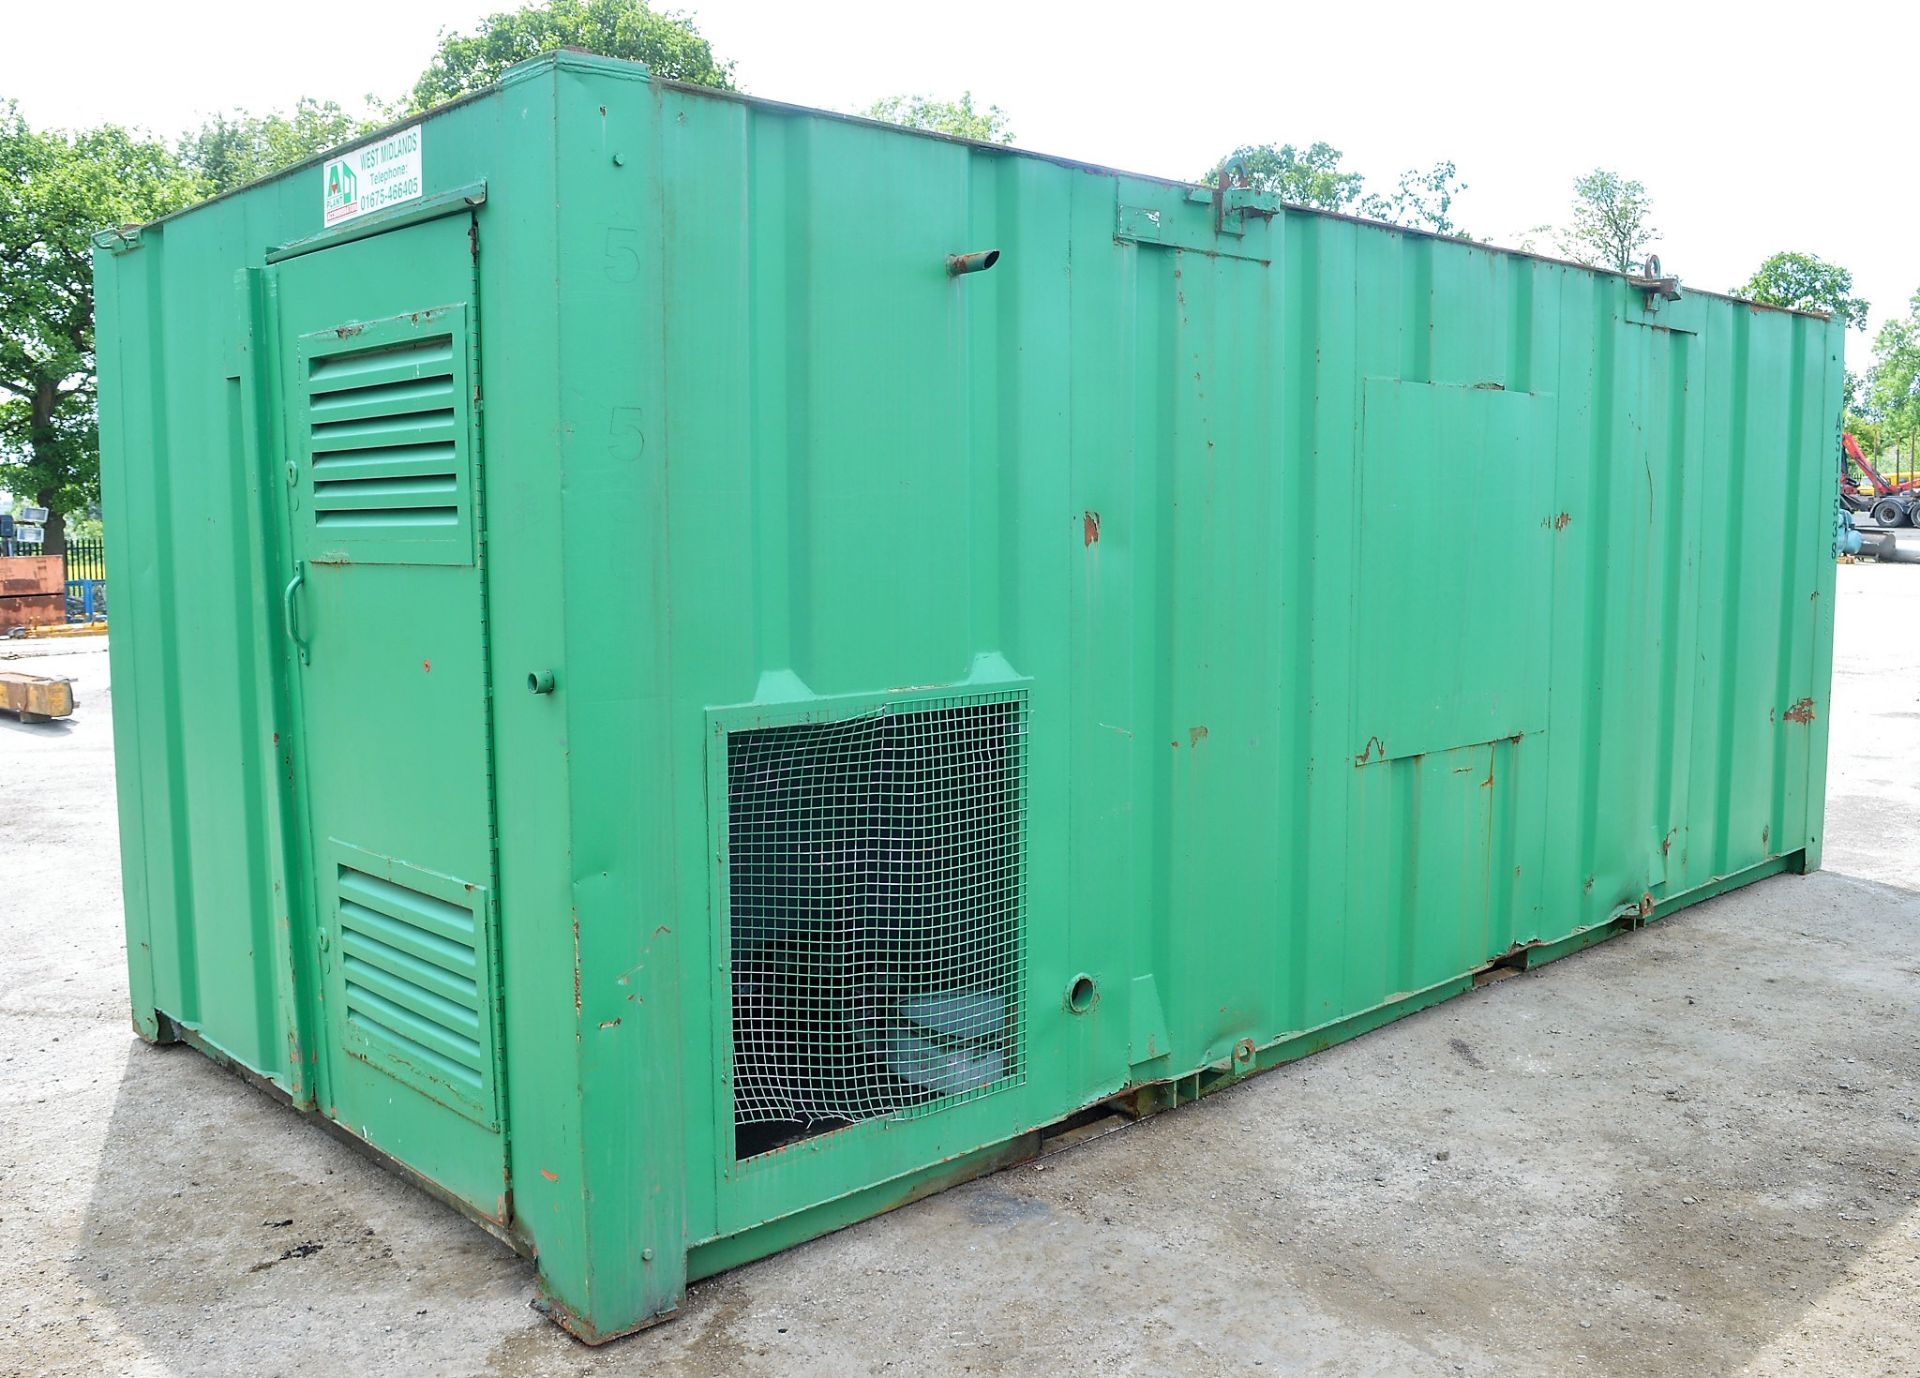 21 ft x 9 ft steel anti vandal welfare site unit Comprising of: canteen area, toilet & generator - Image 4 of 8